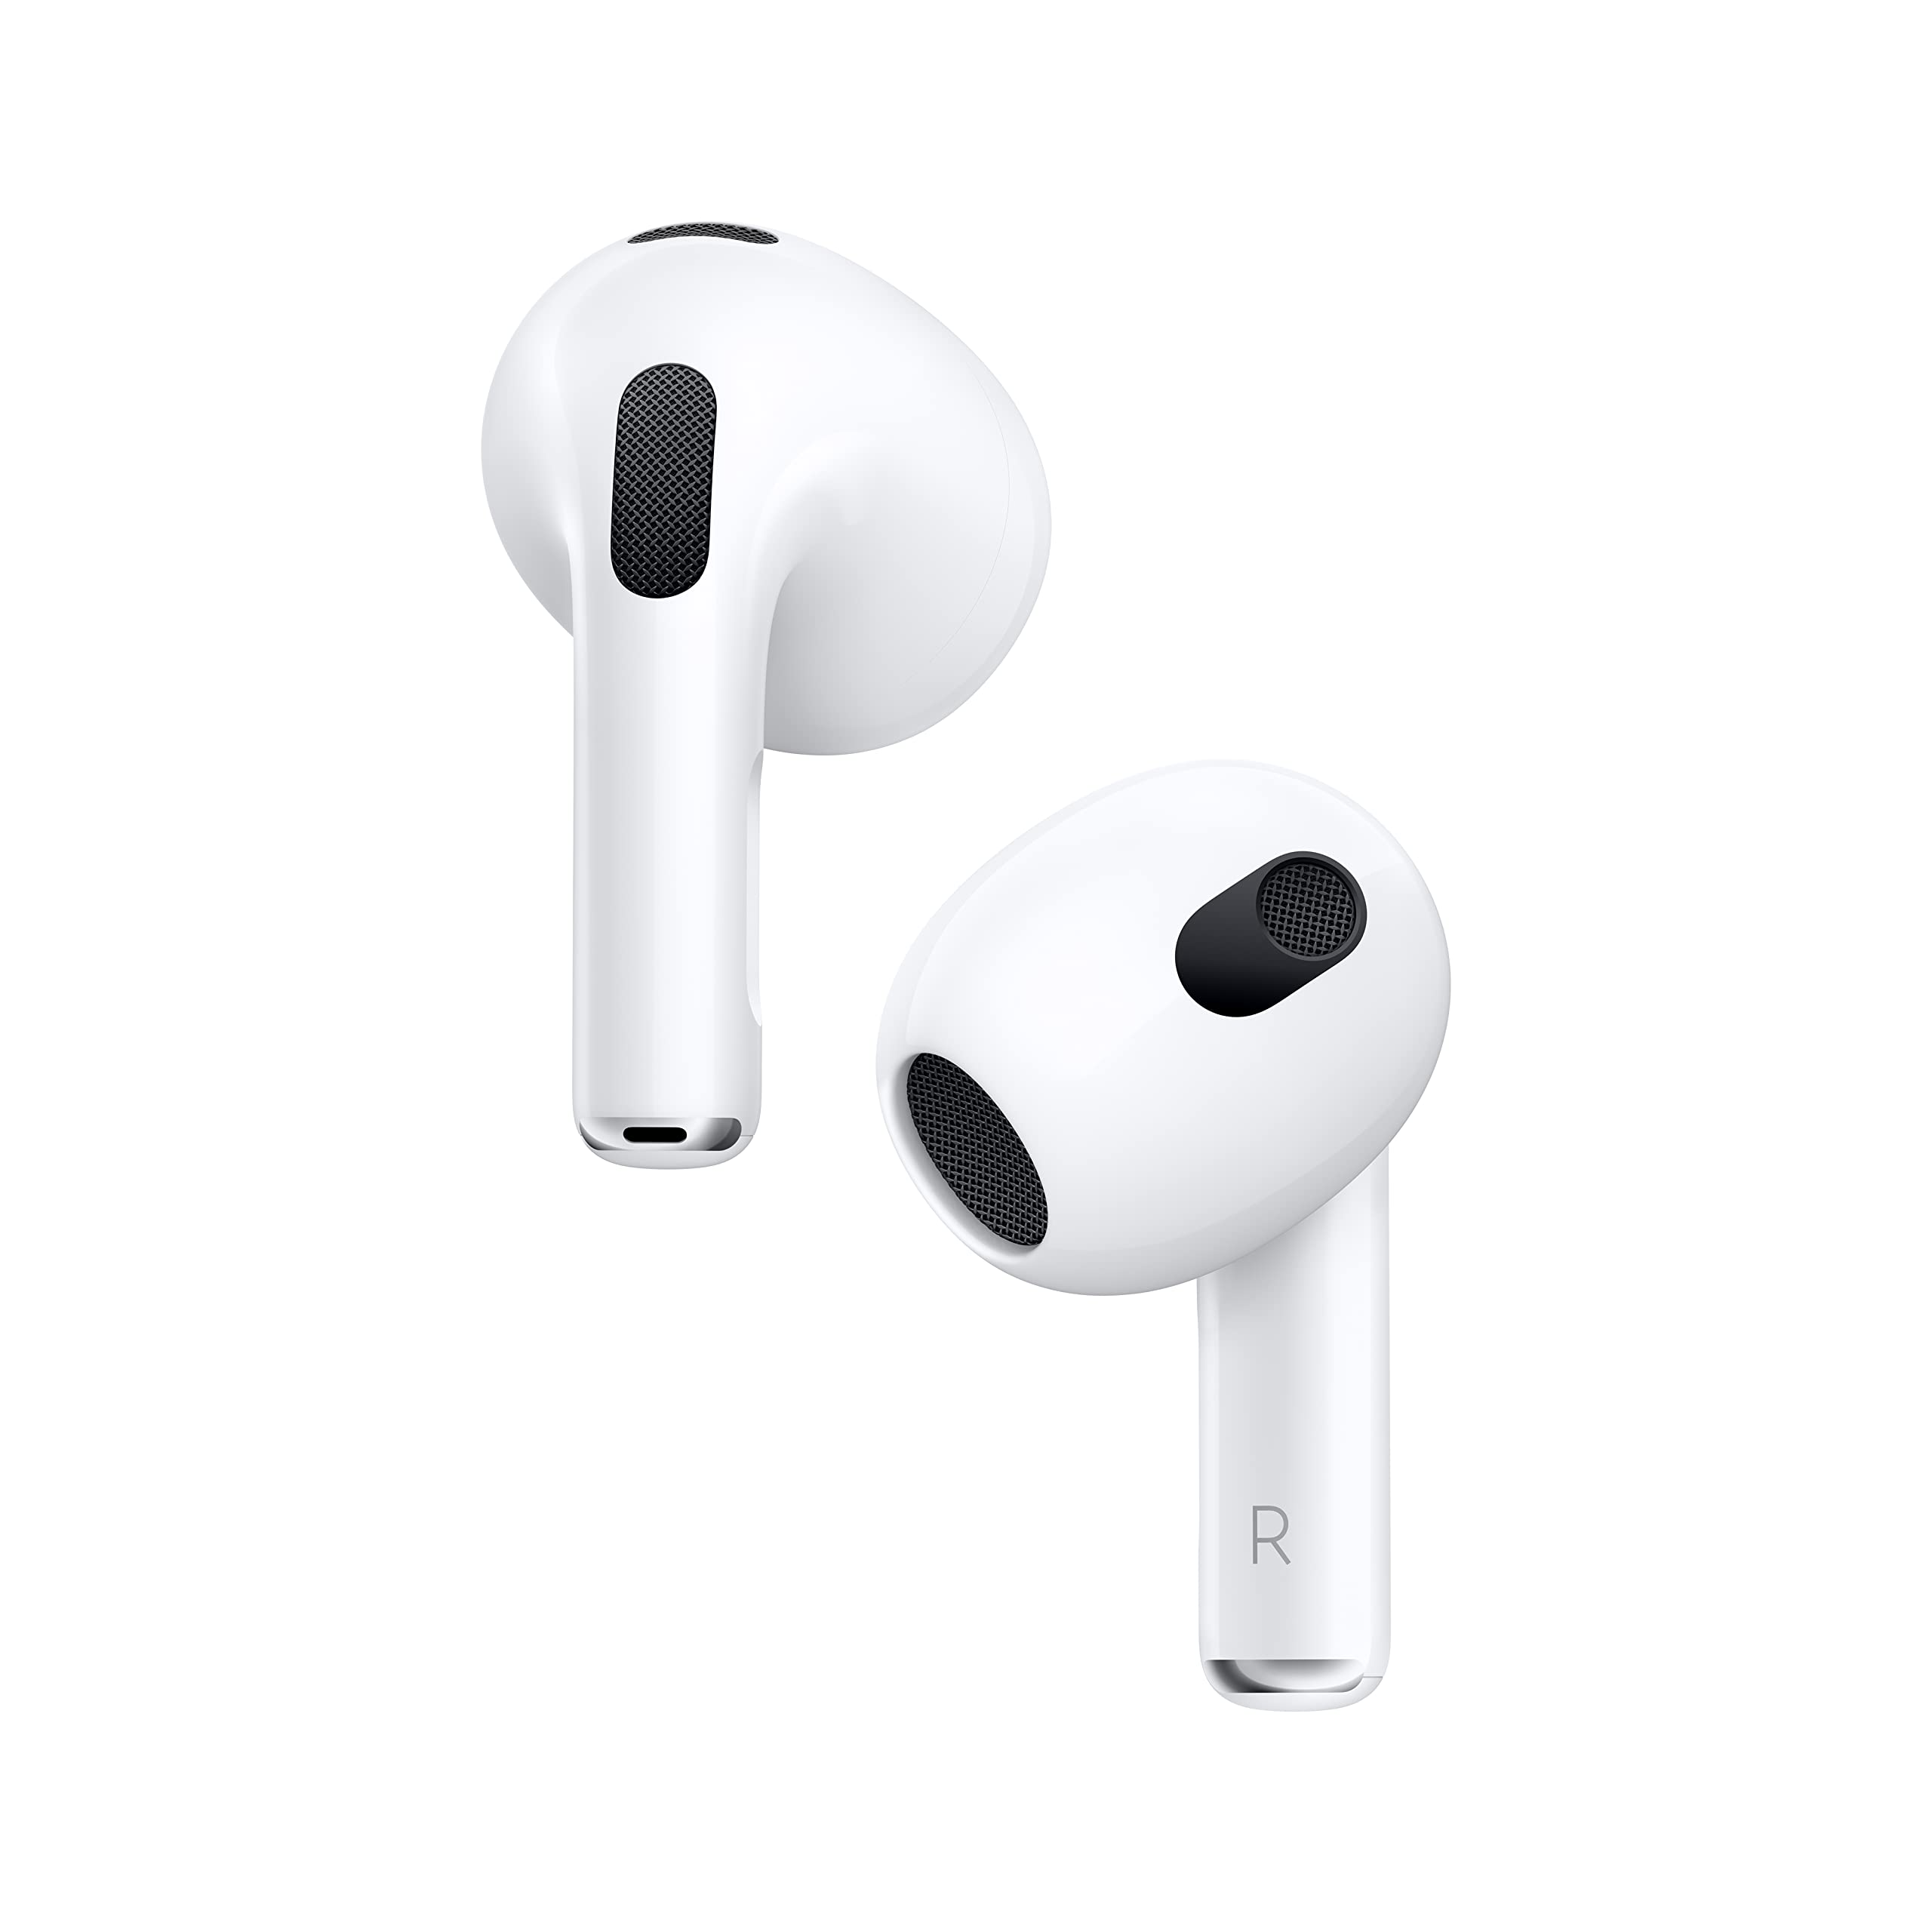 Amazon Prime member: Apple AirPods (3rd gen) for $164.99 at Woot!